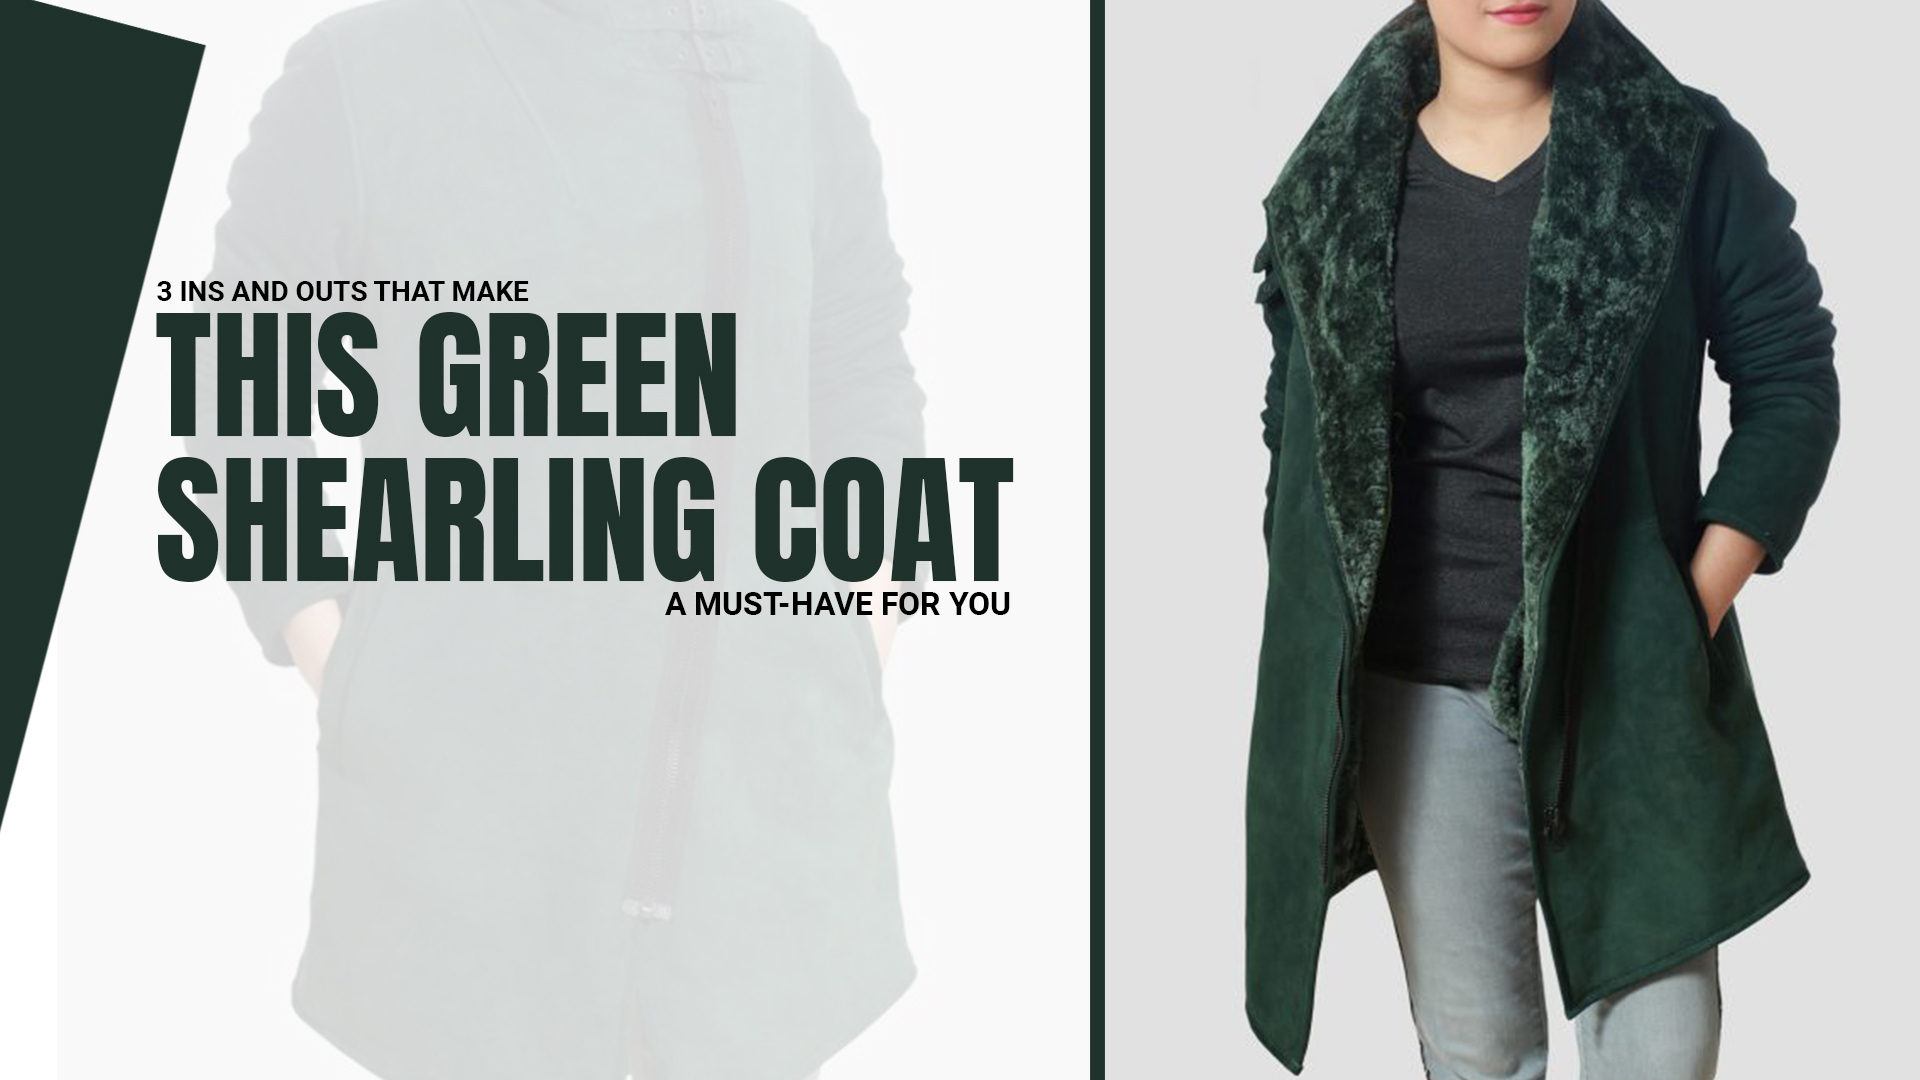 3 Ins And Outs That Make This Green Shearling Coat A Must-Have For You